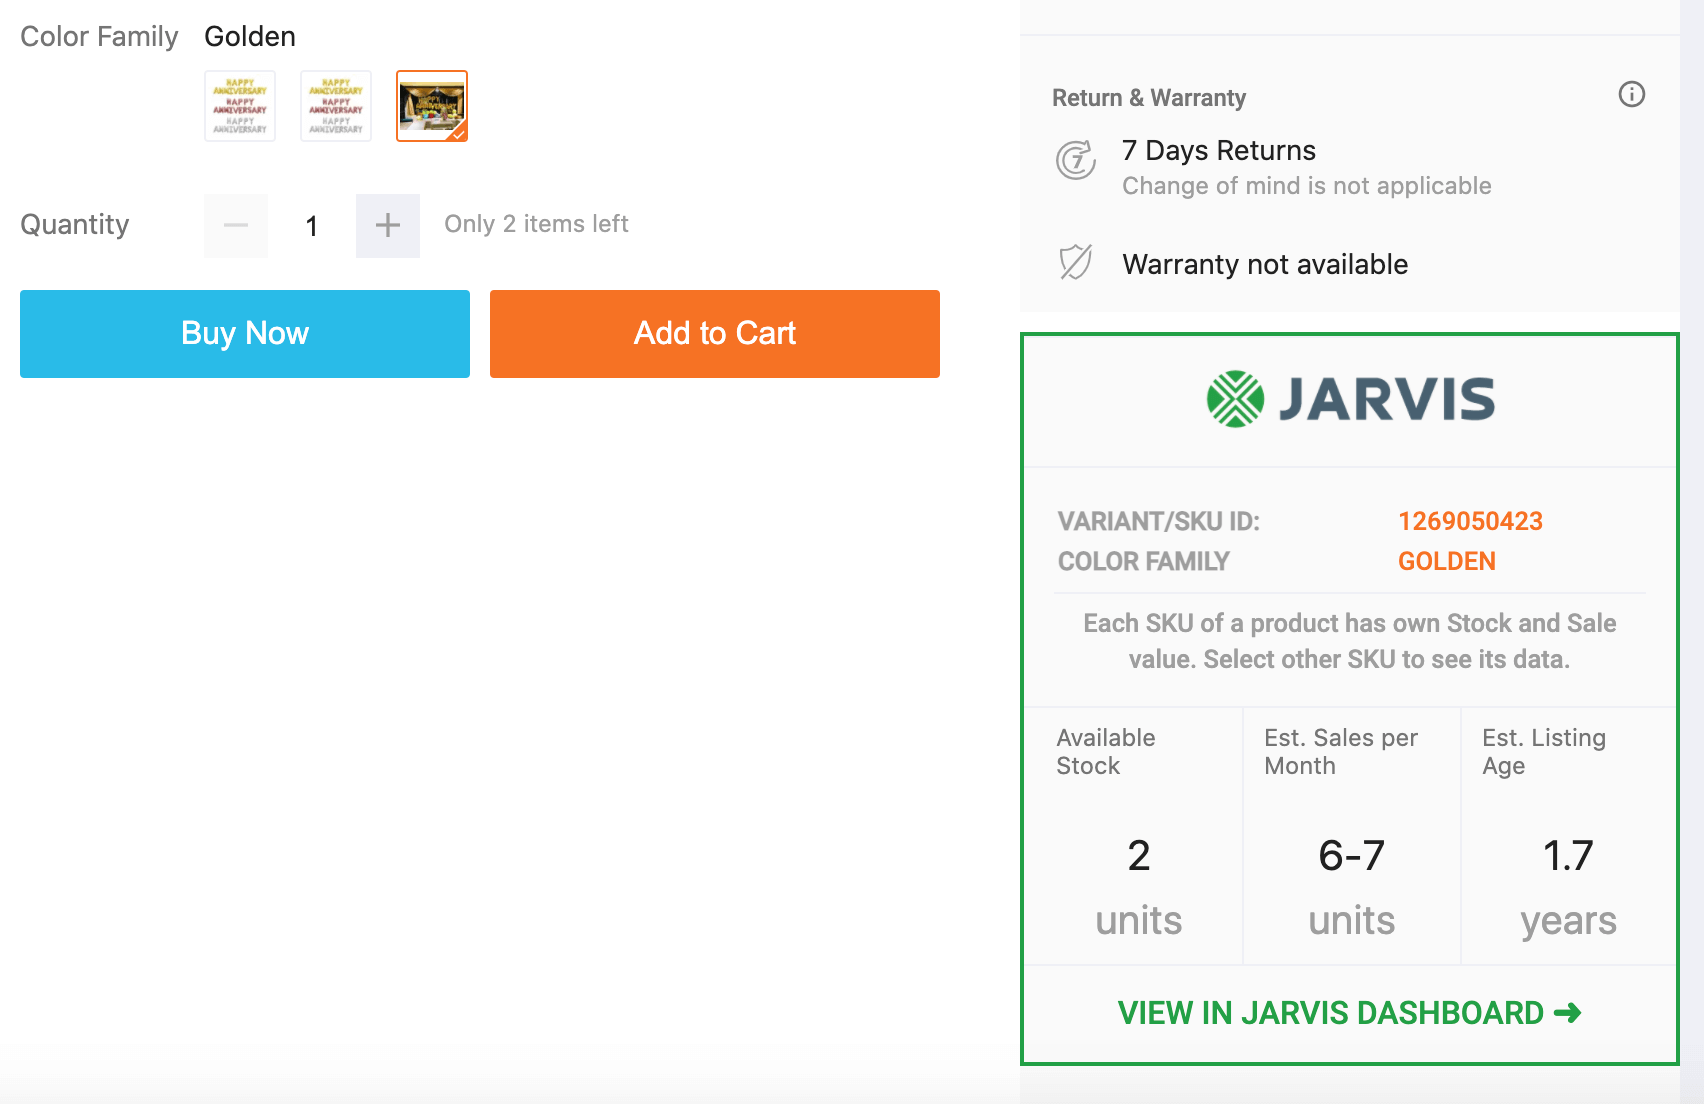 Jarvis Chrome Extension Shows single product stats including stock, age and sales